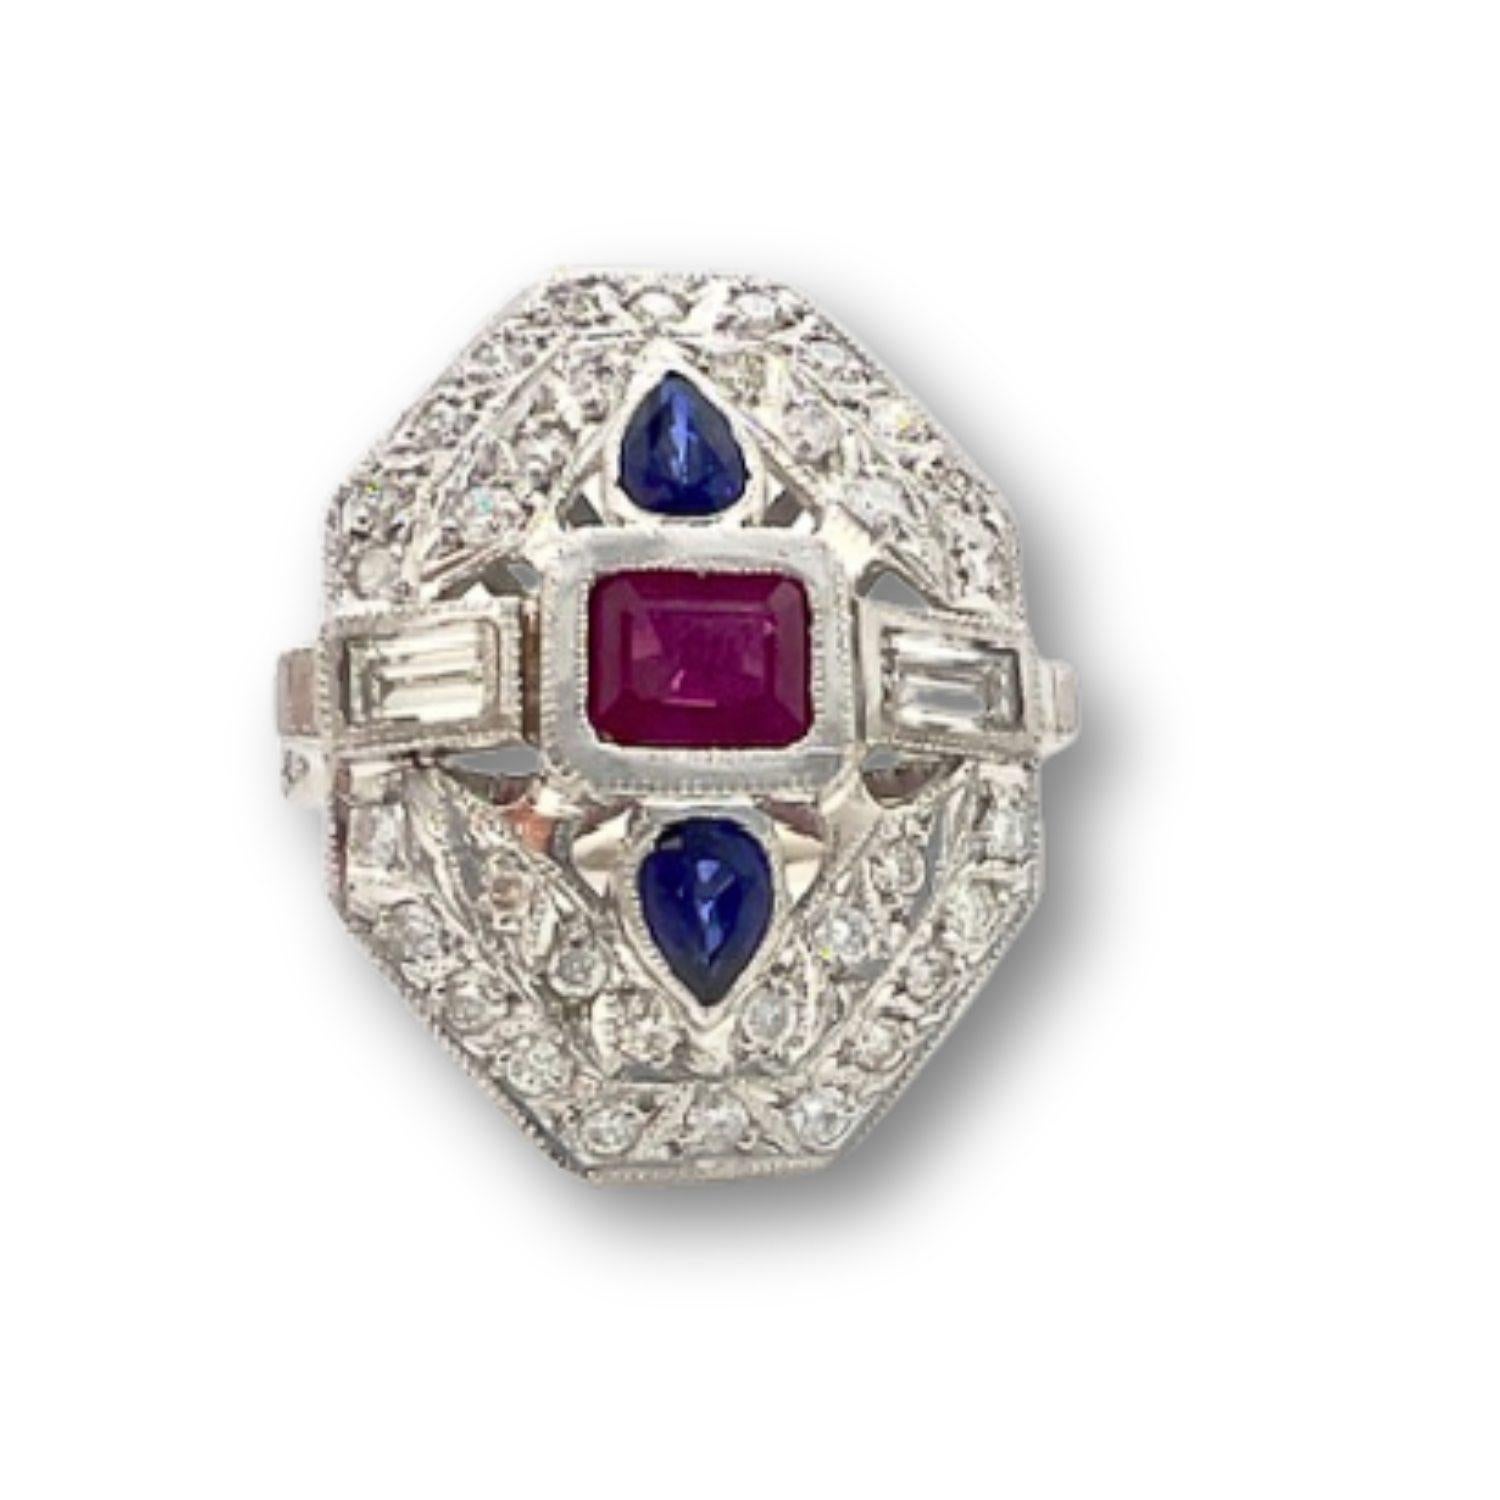 Elevate your style with this stunning Art Deco-inspired platinum ring adorned with rubies, sapphires, and diamonds. Weighing 9.51 grams and sized at 17.5/57.5, this ring boasts a sizeable presence, measuring 2.5 cm in length and 2 cm in